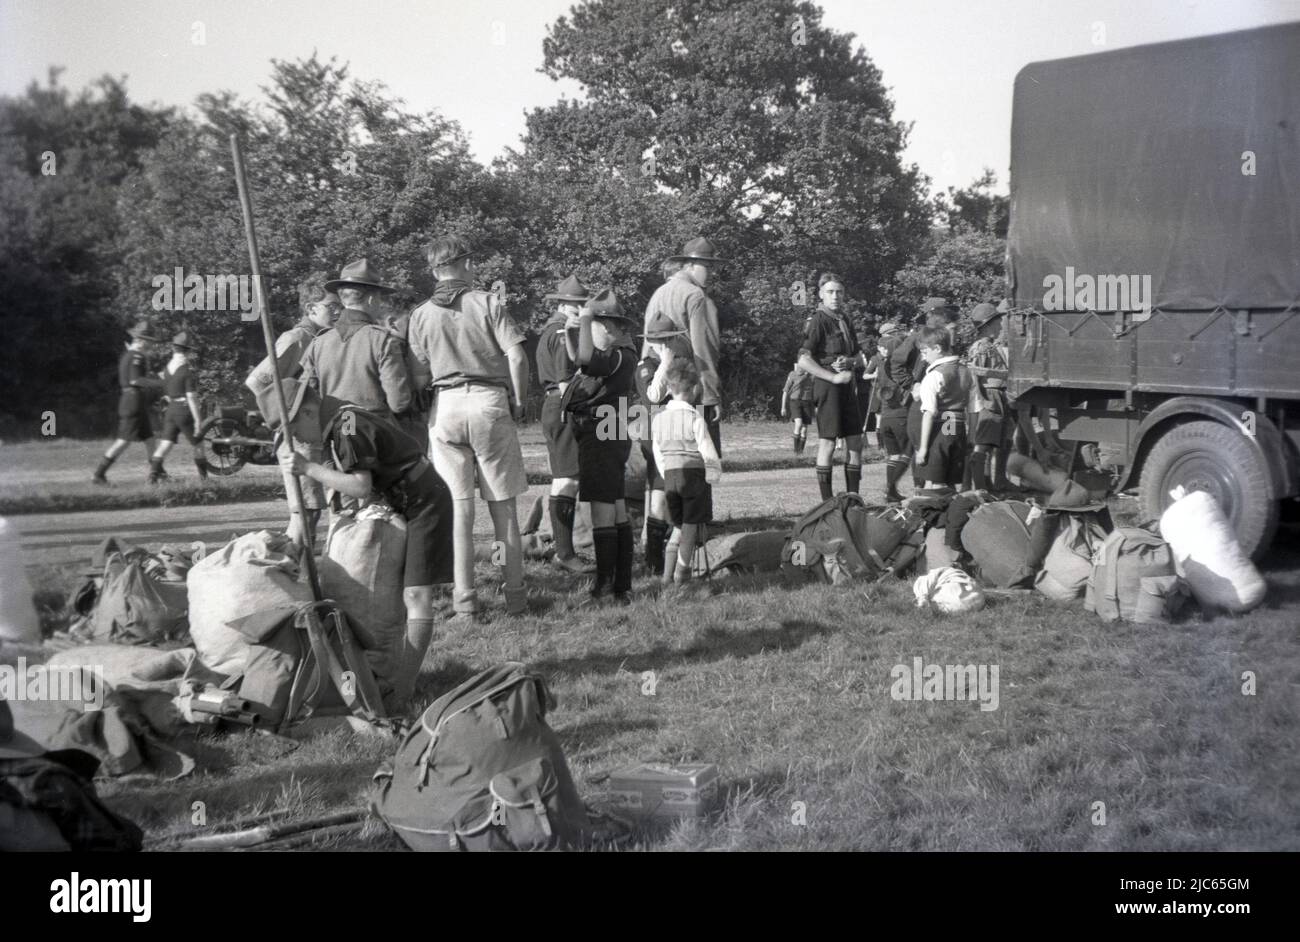 1937, historical, packing up after a scout camp at Ranmore Common, Dorking, Surrey, England, UK. Uniformed Scout masters and boy scouts standing beside canvas rucksacks of the era, packed and ready to go into the waiting truck. Stock Photo